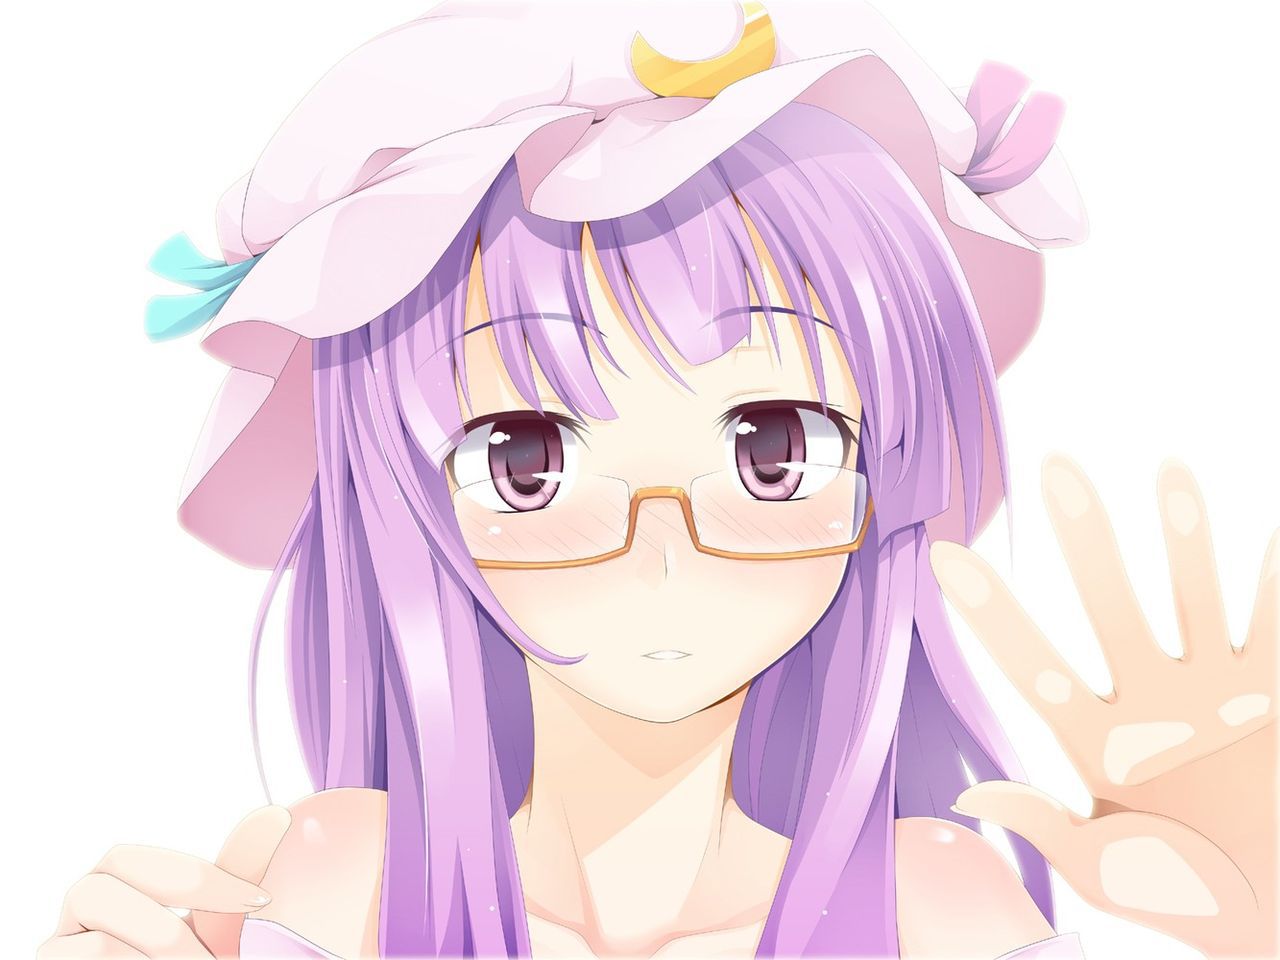 50 pieces of images of パチュリー where I used glasses [on June 9 a day of パチュリー] 48